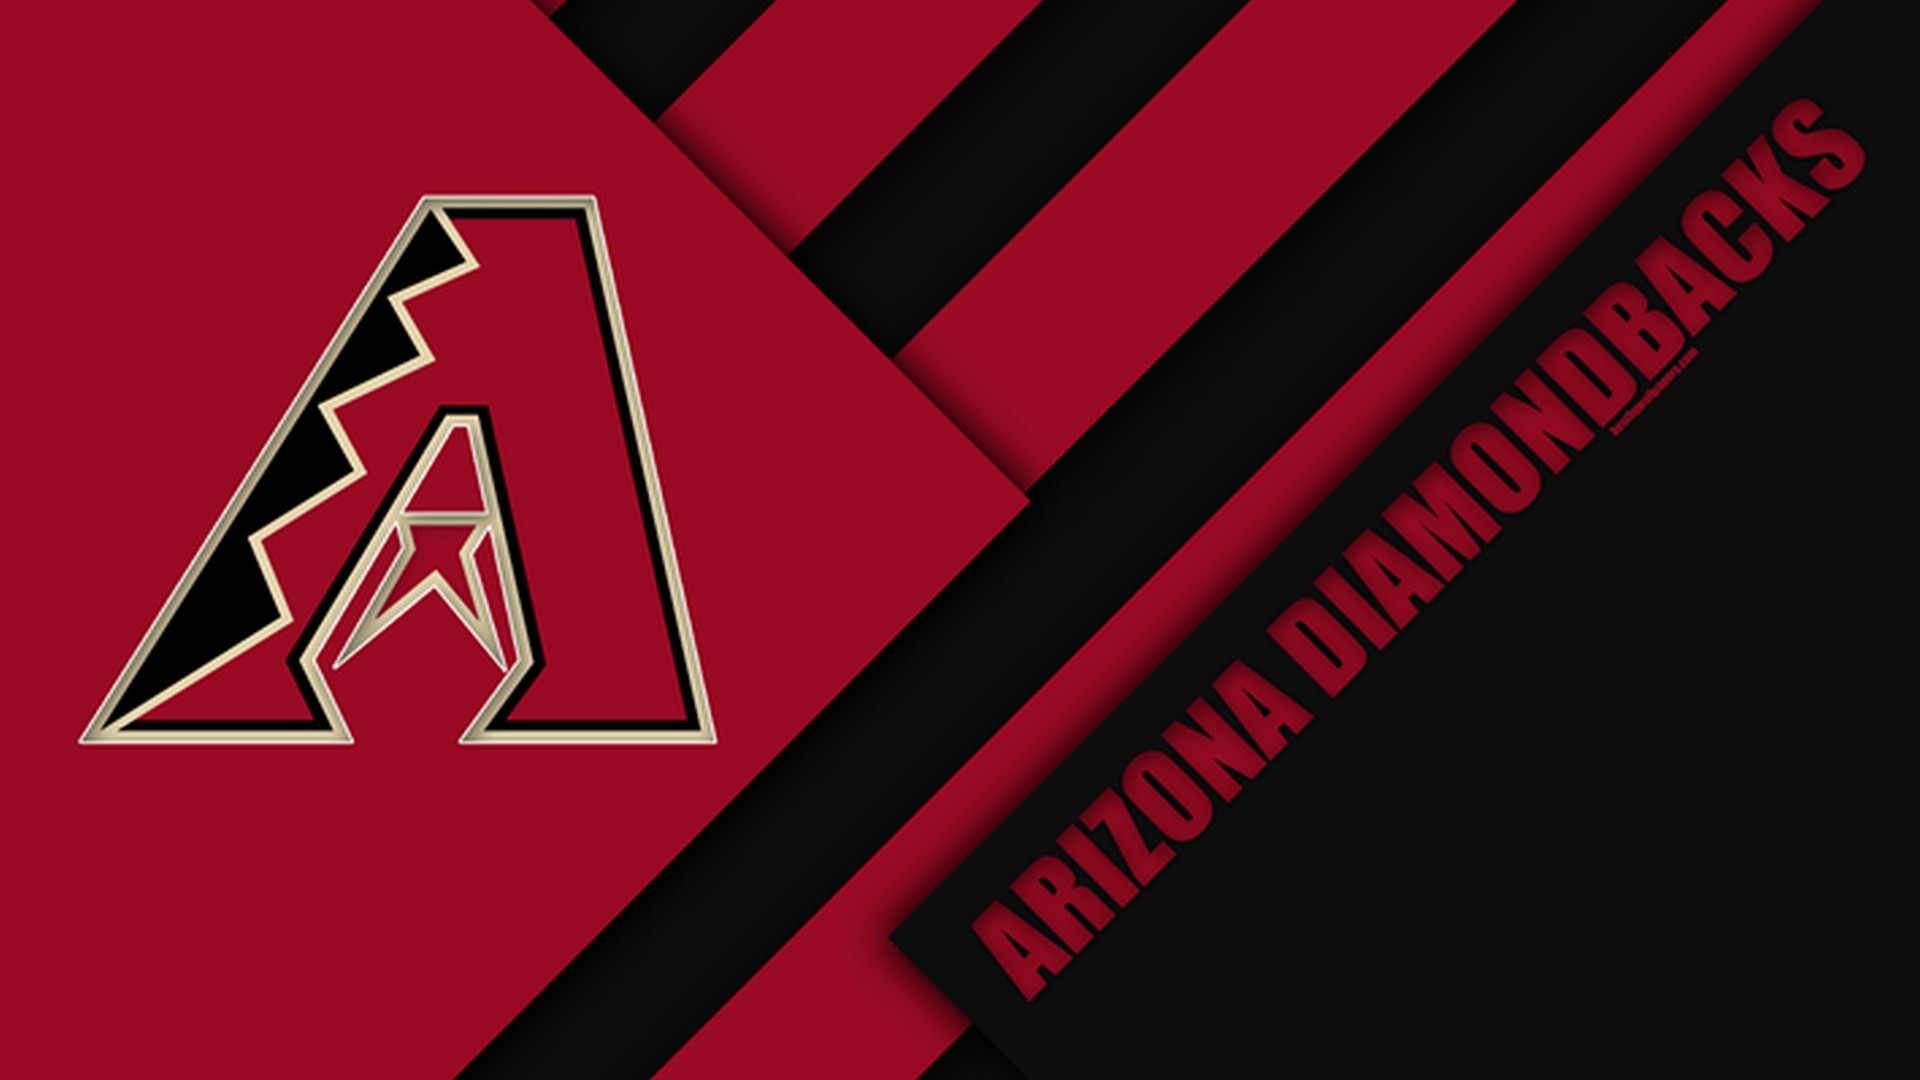 Backgrounds Arizona Diamondbacks MLB HD with high-resolution 1920x1080 pixel. You can use this wallpaper for Mac Desktop Wallpaper, Laptop Screensavers, Android Wallpapers, Tablet or iPhone Home Screen and another mobile phone device